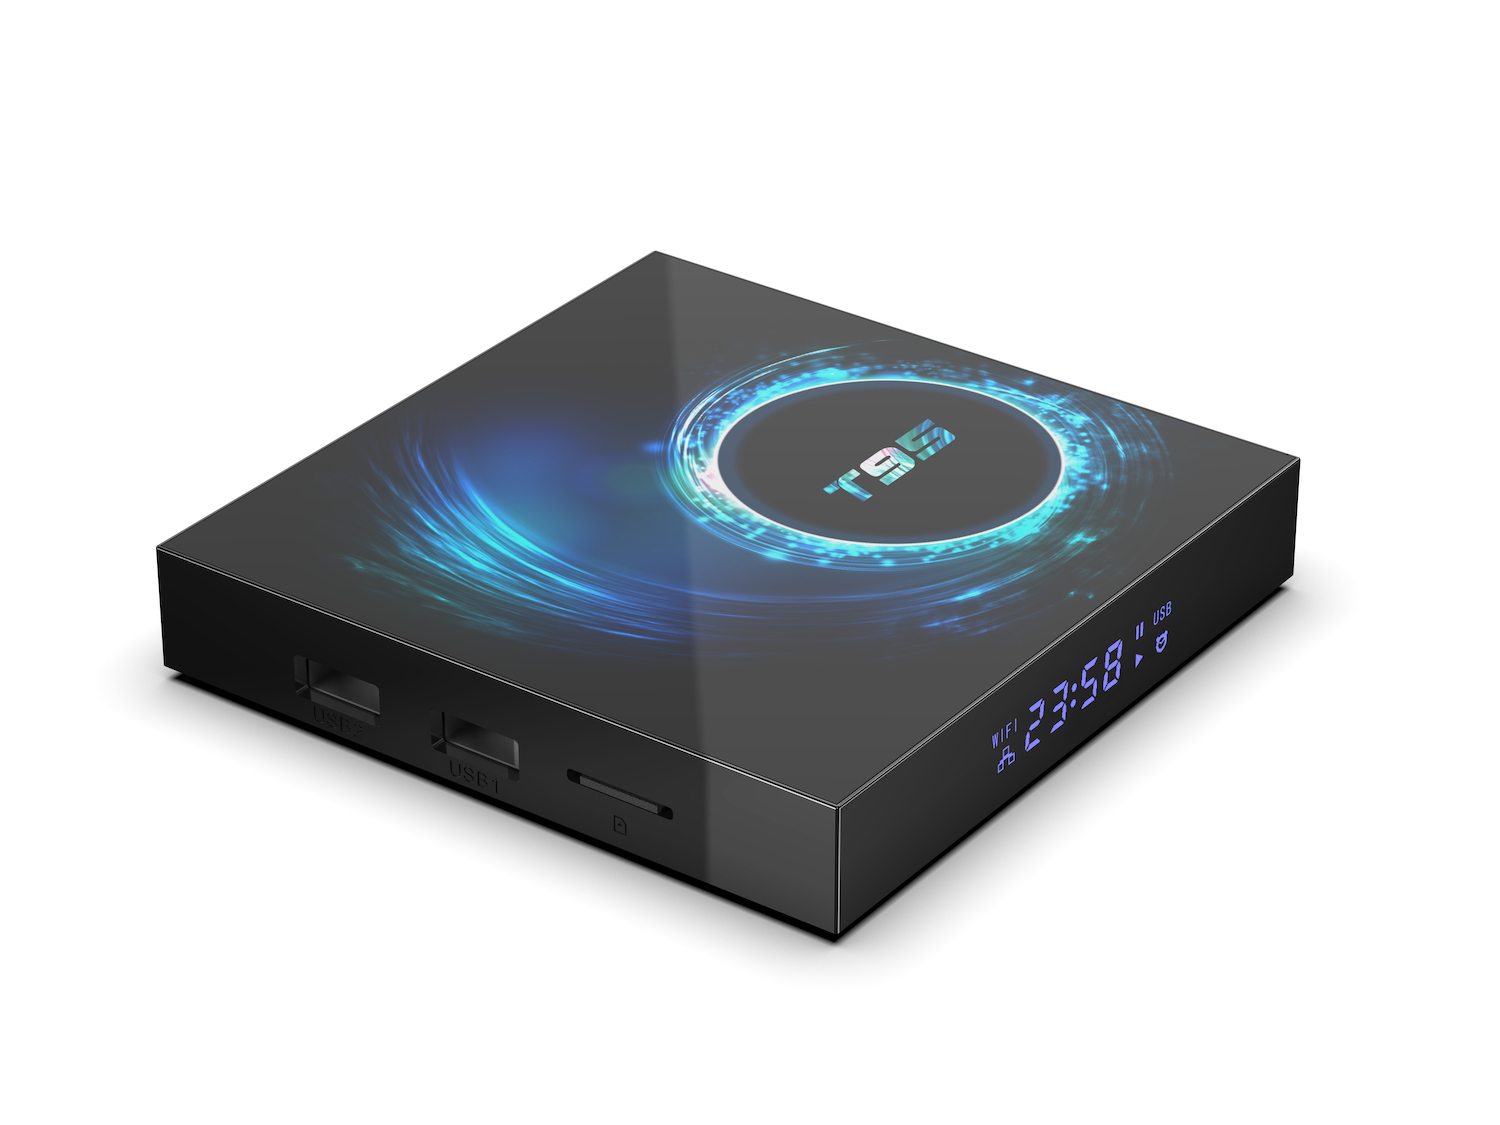 Regularity together Rally Android 10 T95 H616 6K TV box | Shenzhen JersTech Limited